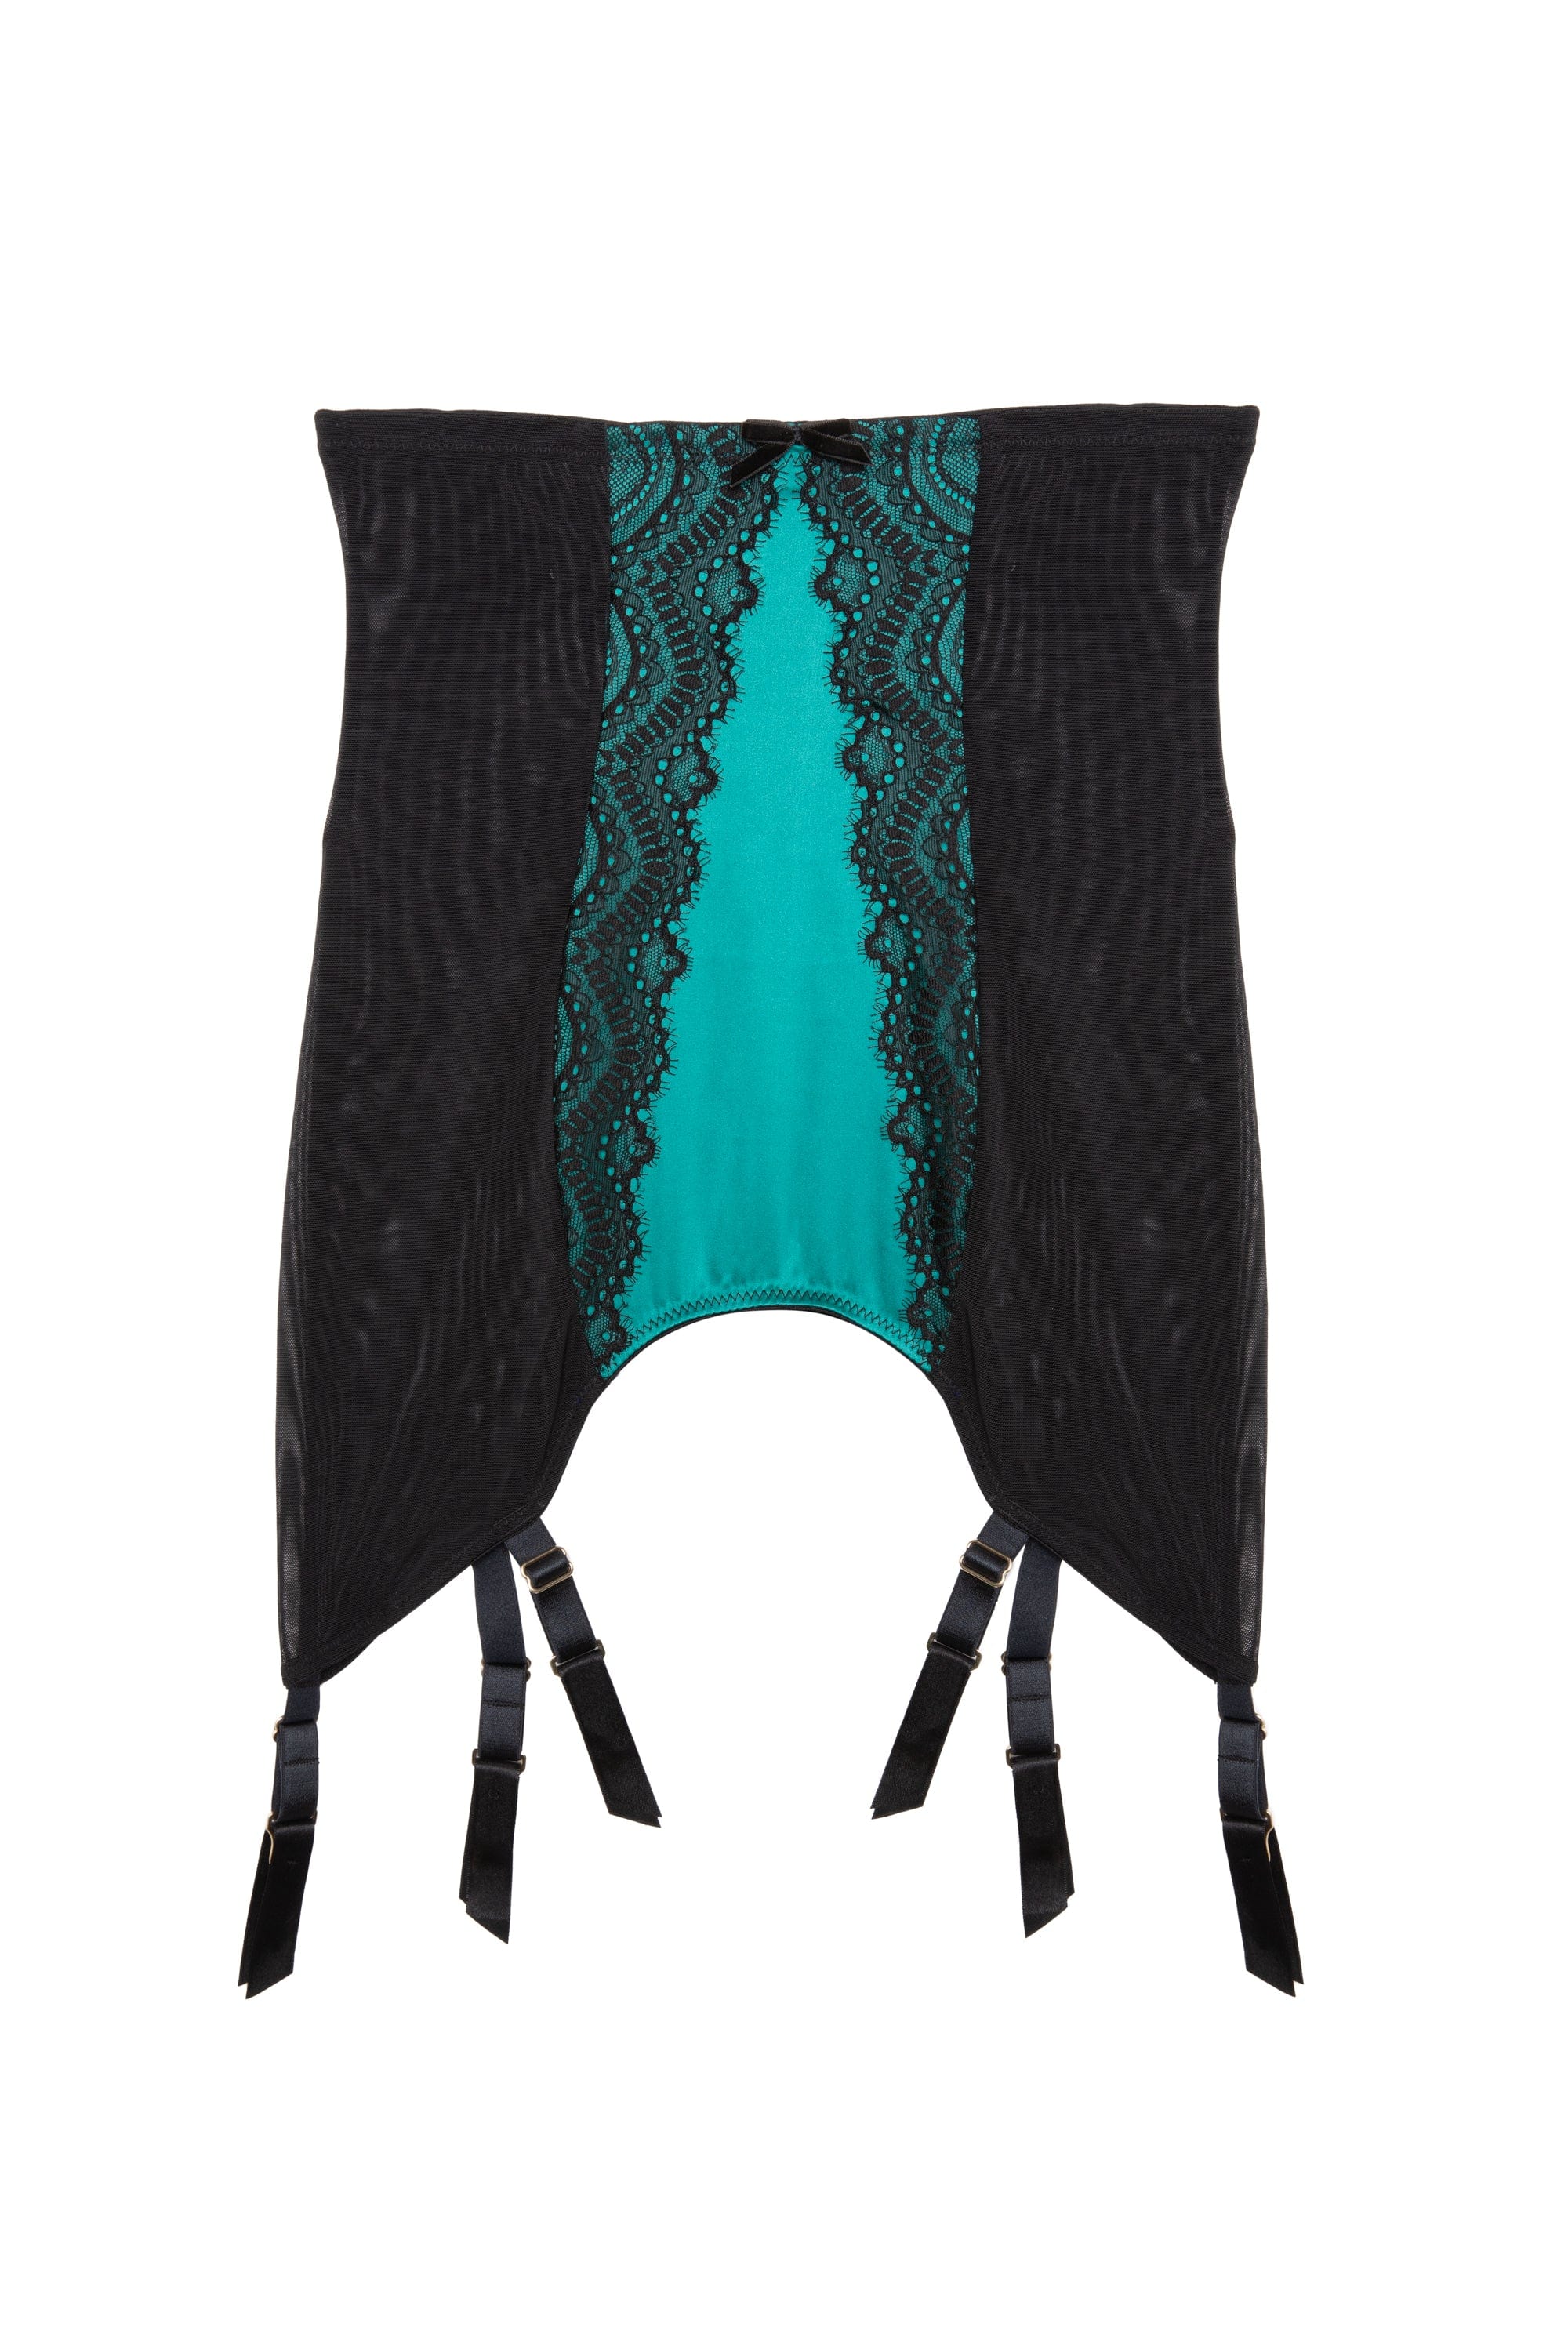 Melda Teal Satin And Lace Girdle